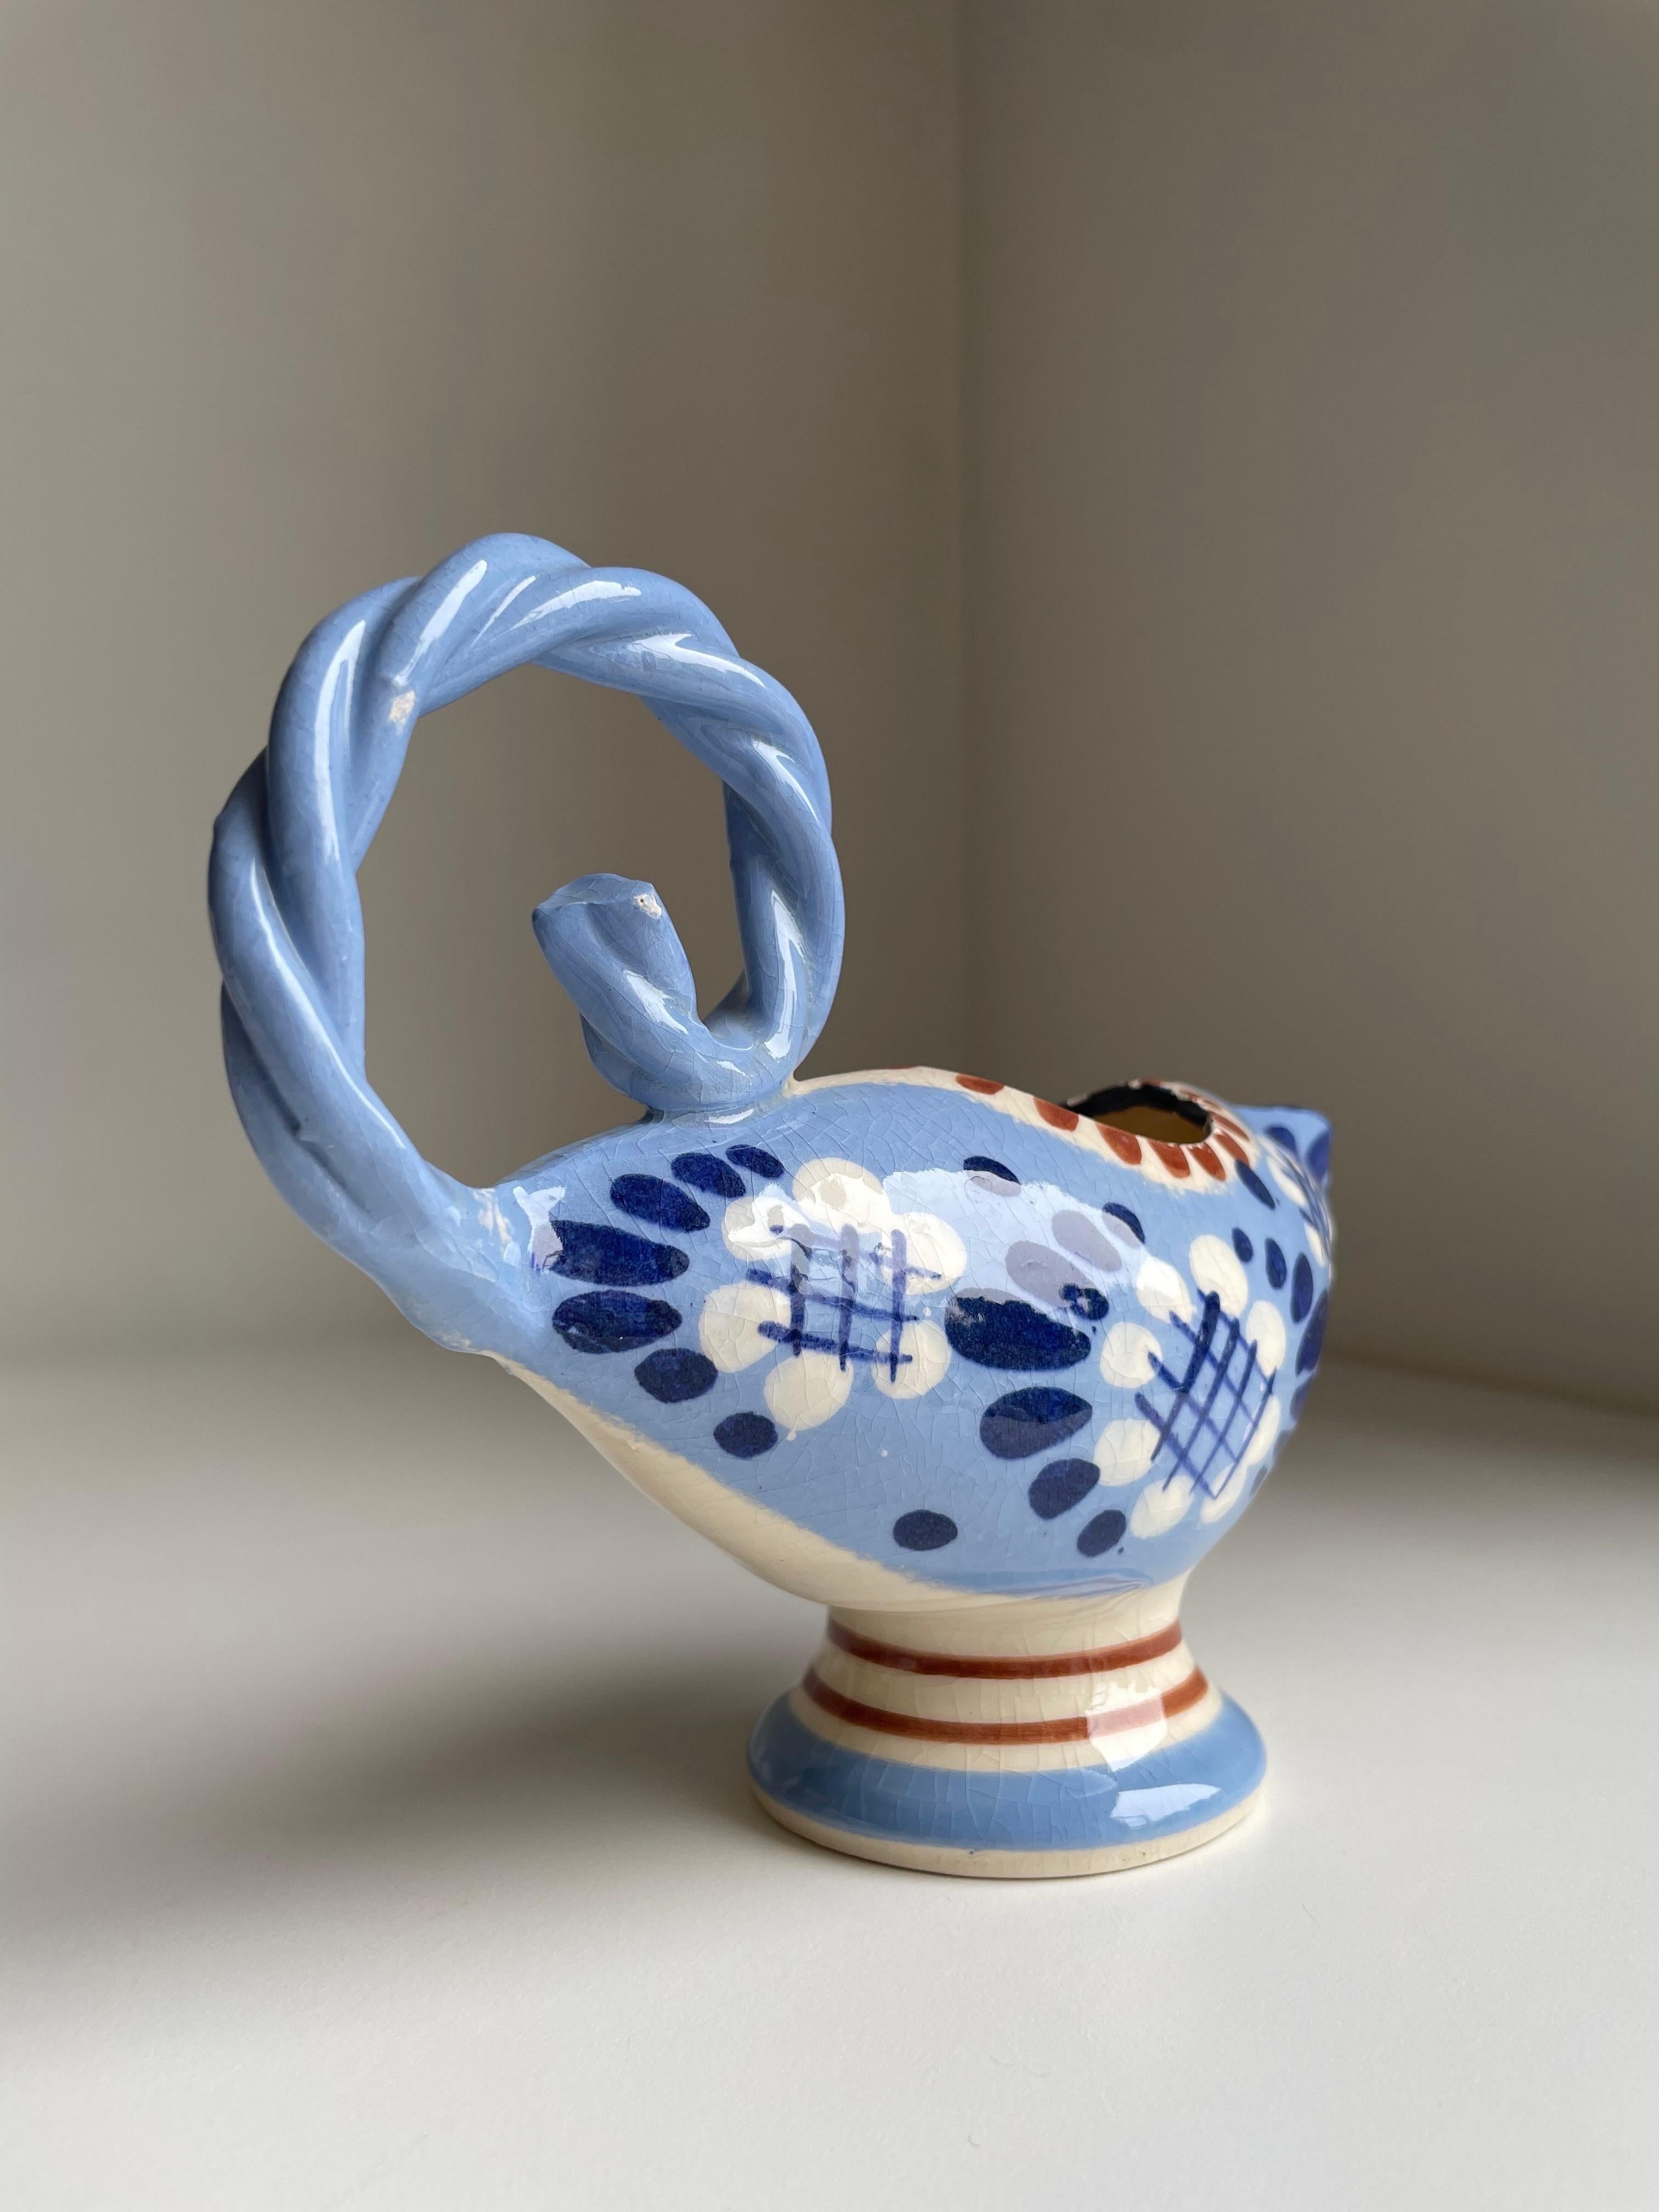 Handmade 1950s ceramic low pitcher vase with large braided handle. Light blue base with cream white and dark blue floral decor and cinnamon brown accents and lines. Stamped under base. Great vintage condition consistent with age and wear.
Denmark,